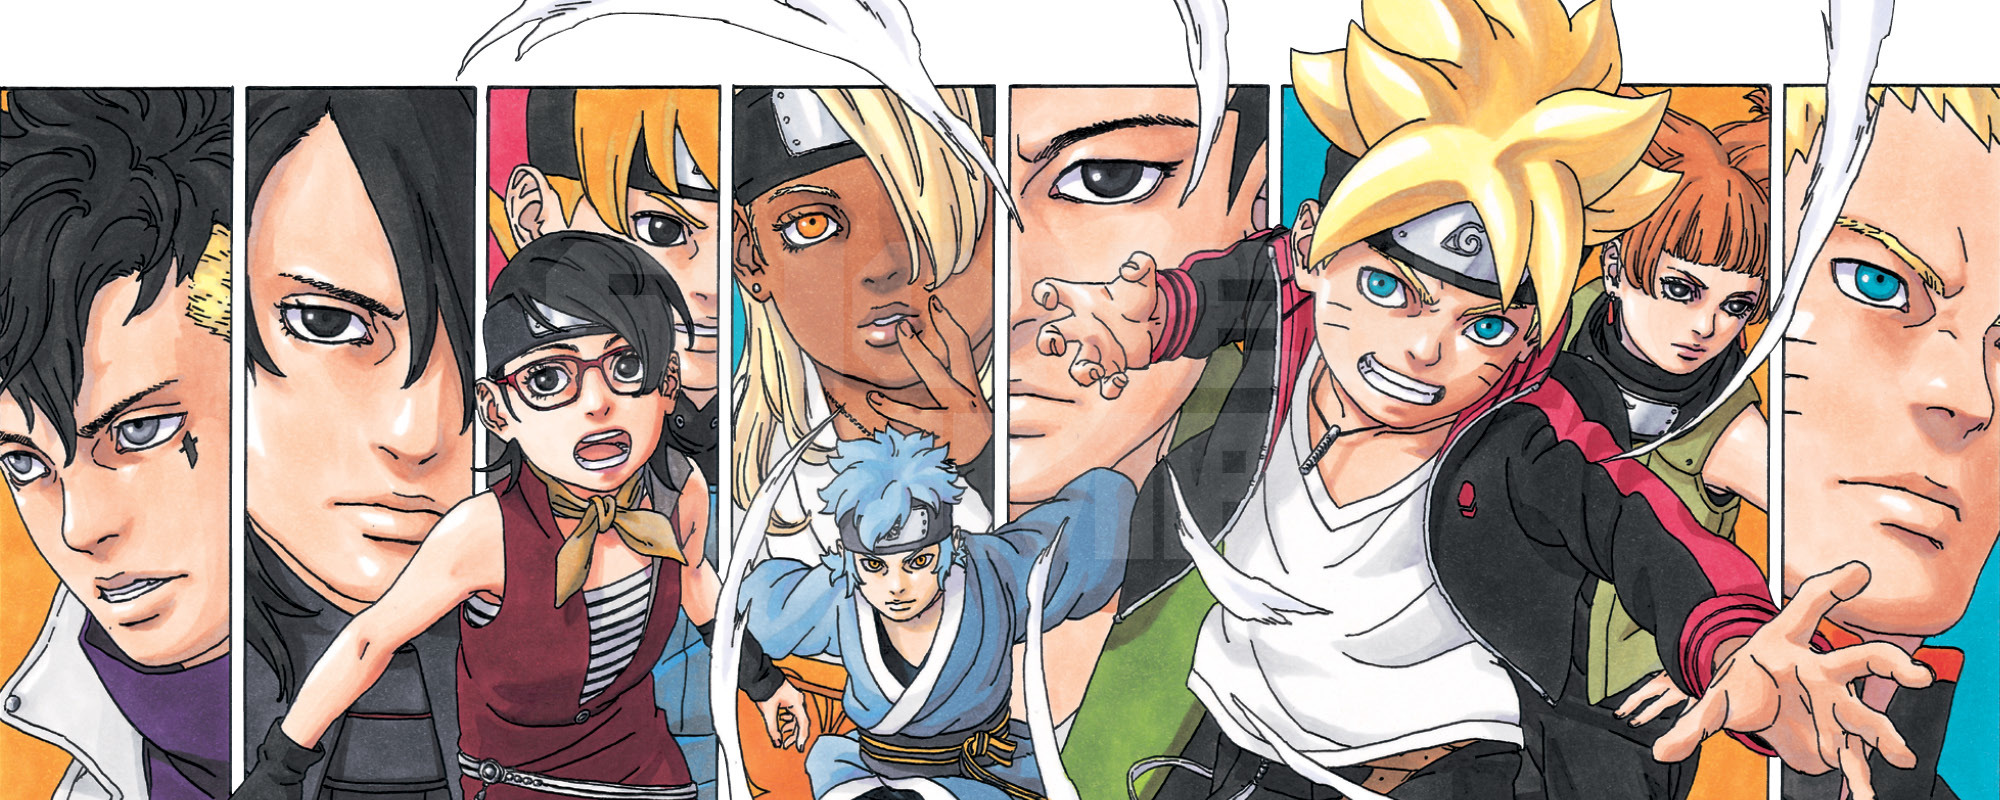 Boruto Chapter 81: Release date revealed, spoiler predictions and more details inside!